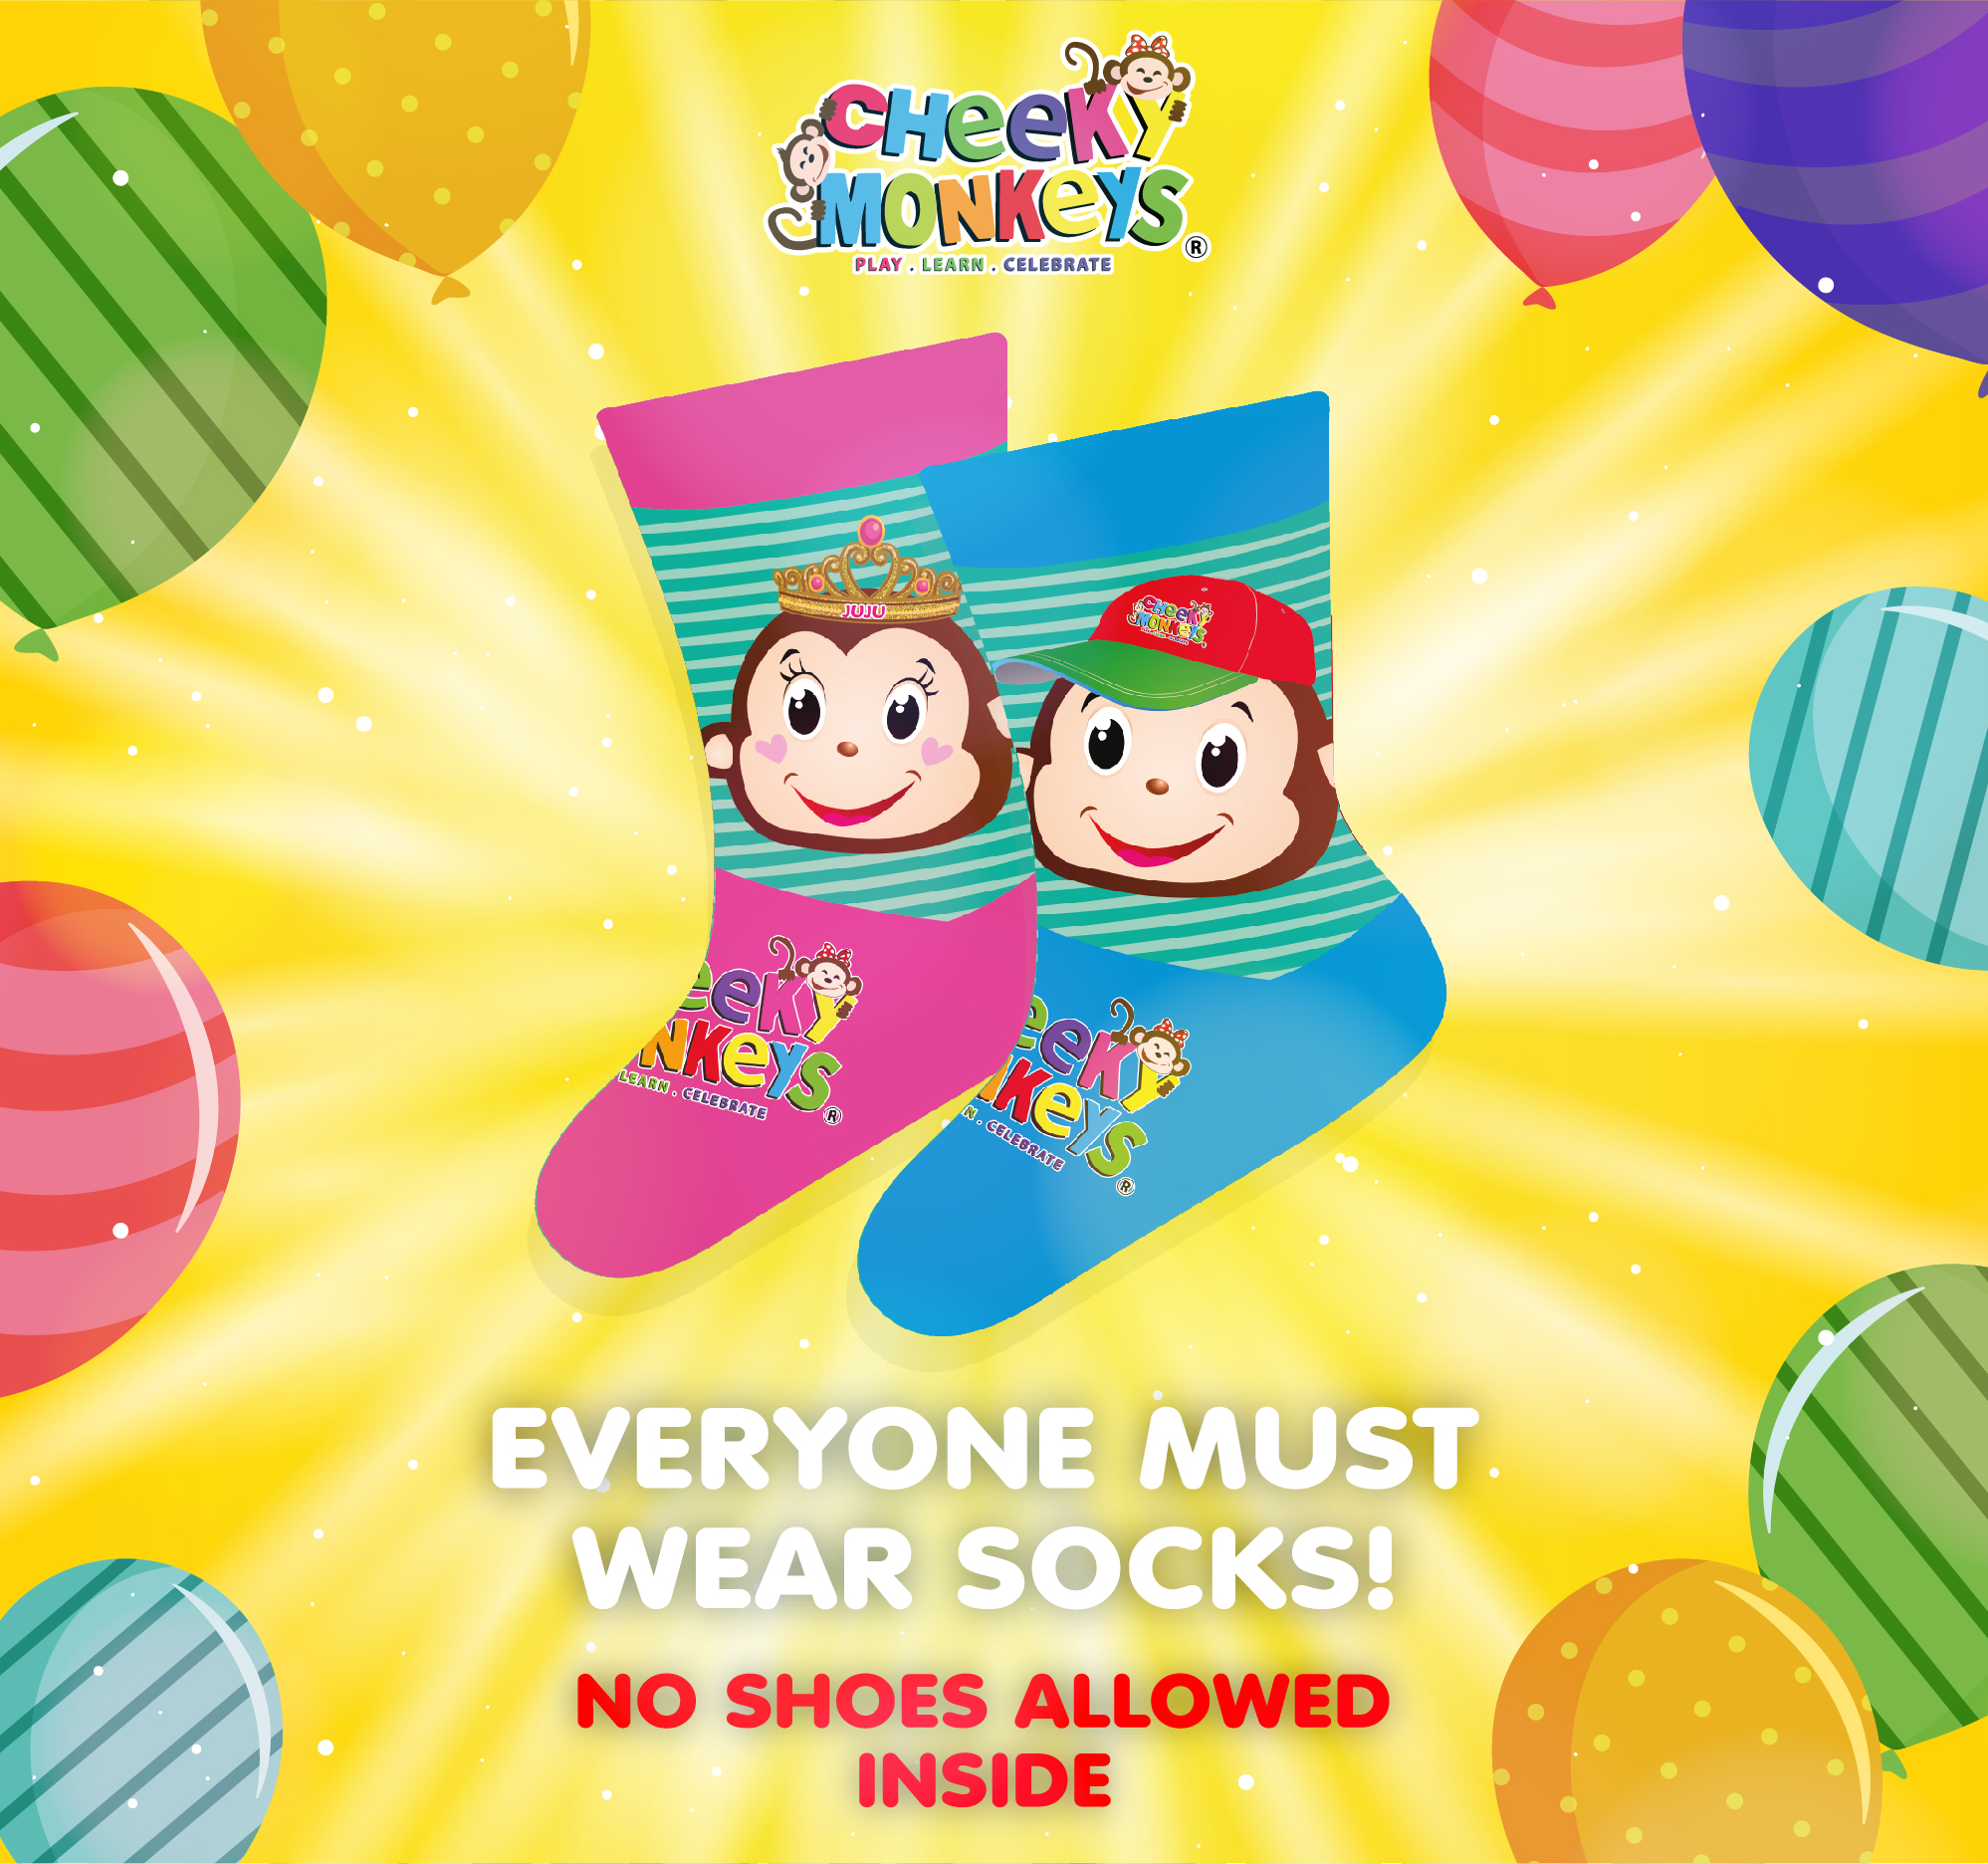 Cheeky Monkeys Philippines - Socks Only Policy